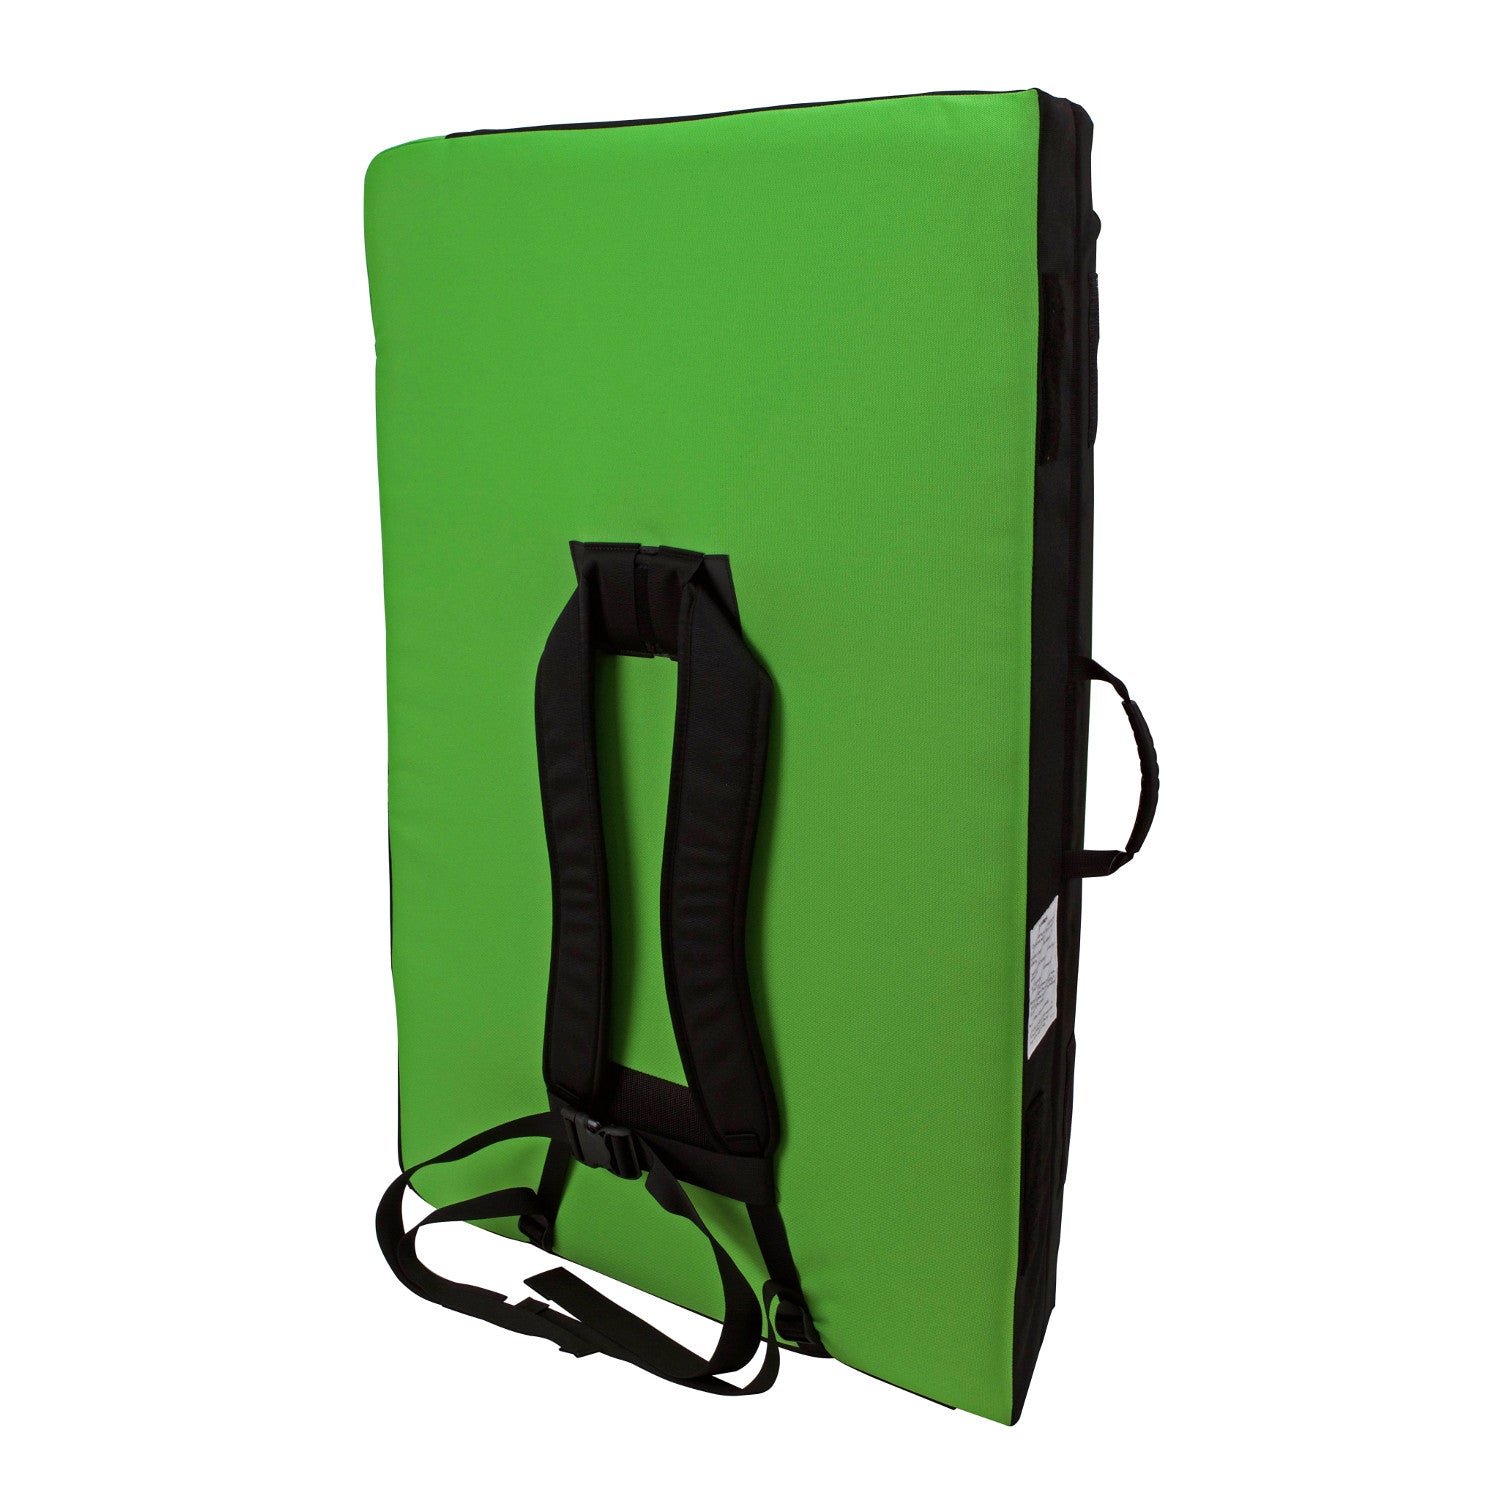 Metolius Session II crash pad, shown closed and stood upright in black and green